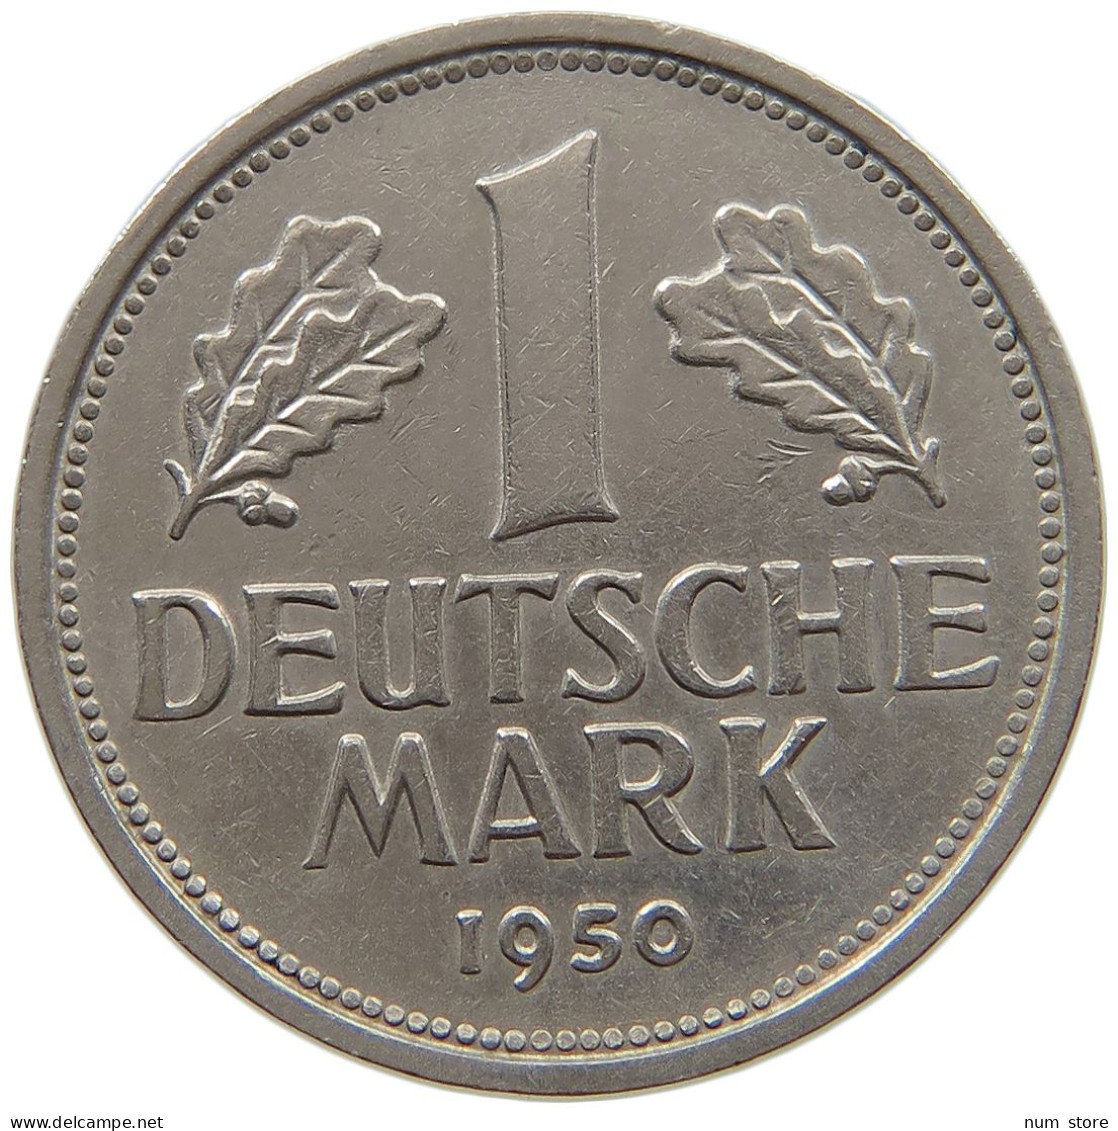 GERMANY WEST 1 MARK 1950 F #a072 0257 - 1 Marco